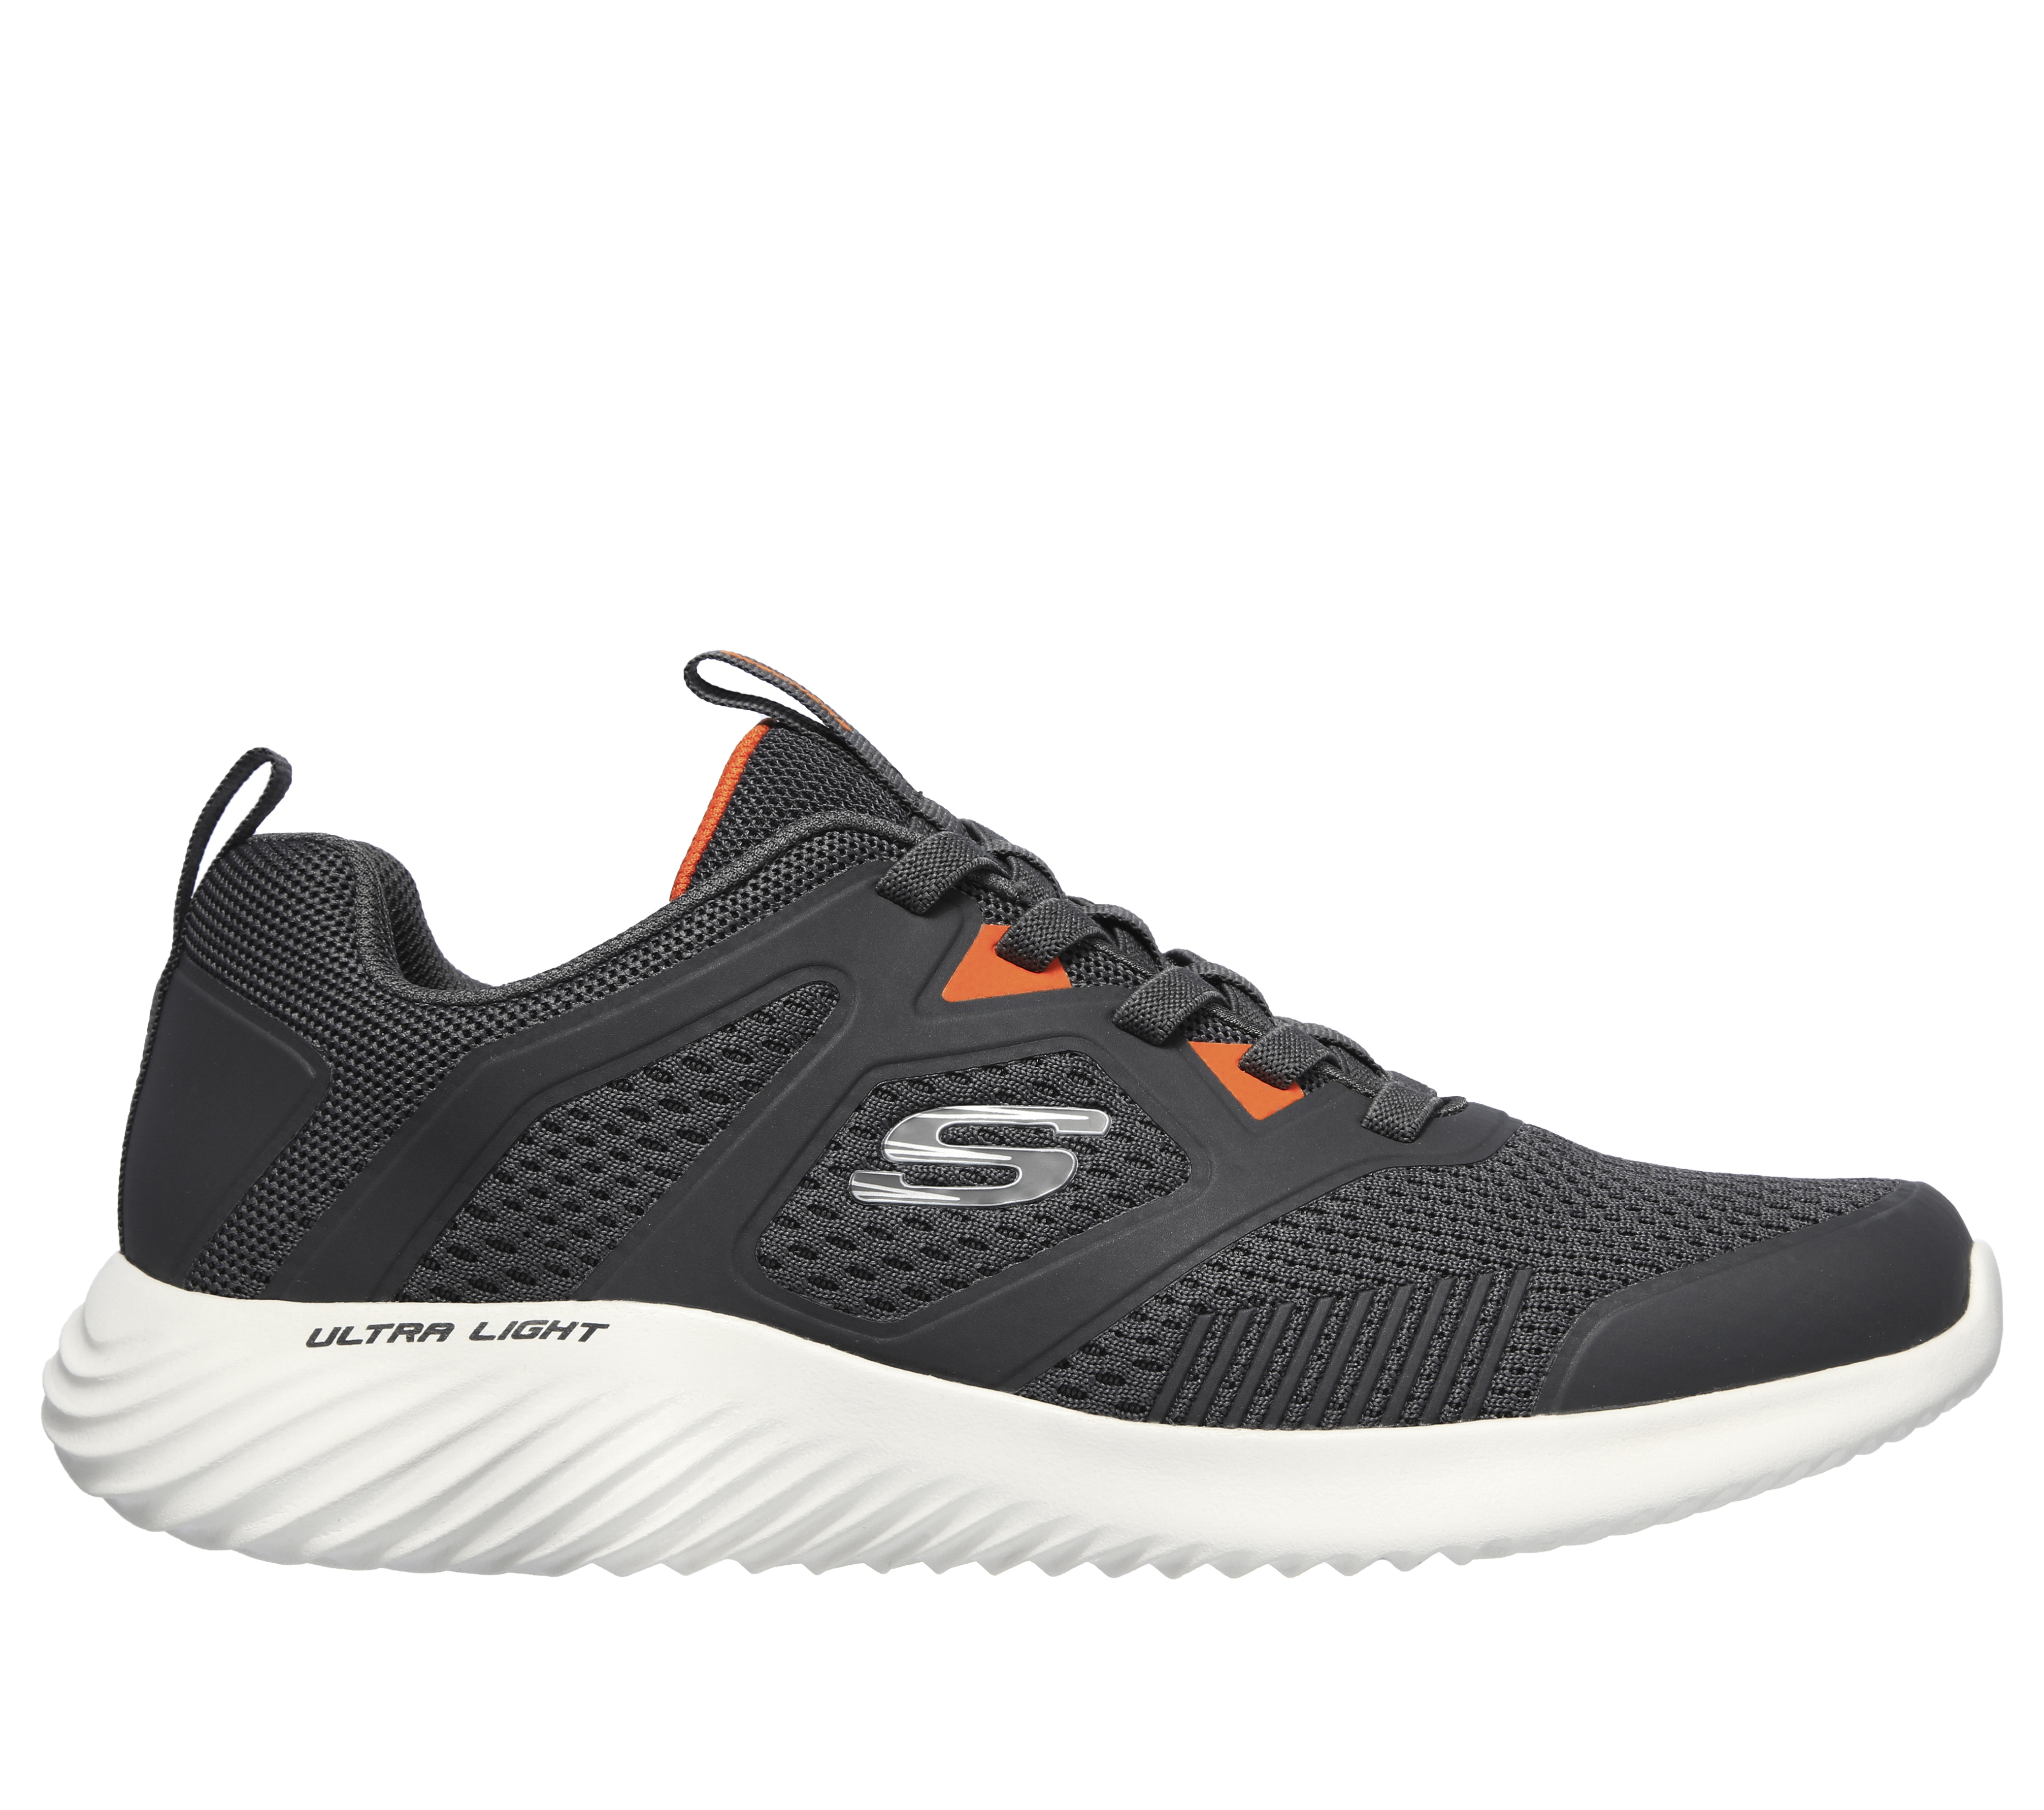 Shop the Bounder - High Degree | SKECHERS